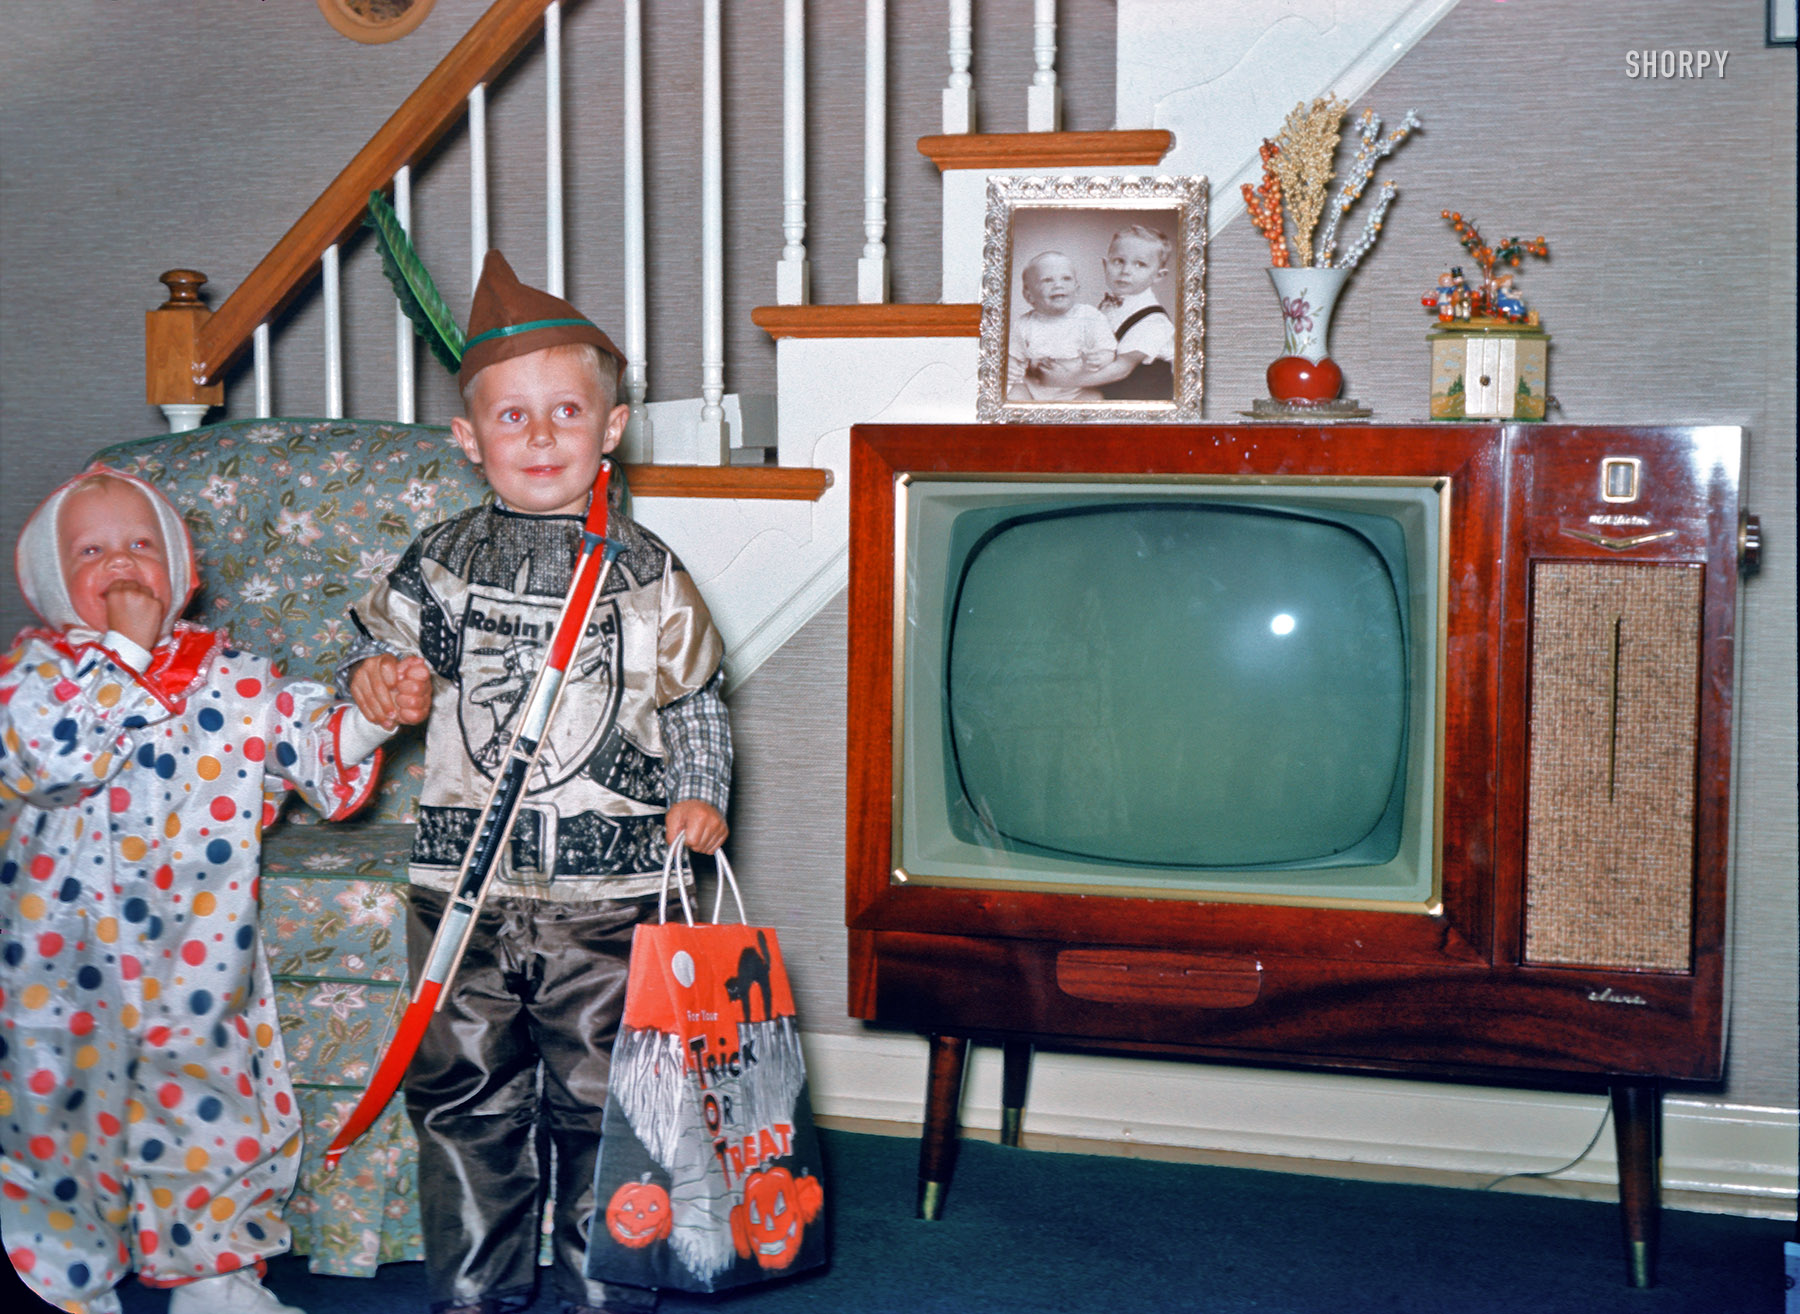 October 1958, somewhere in Pennsylvania. Big brother is ready for a night of trick-or-treating. Rob from the rich, and share with your understudy! Our fourth selection from a batch of Kodachrome slides found on eBay. View full size.